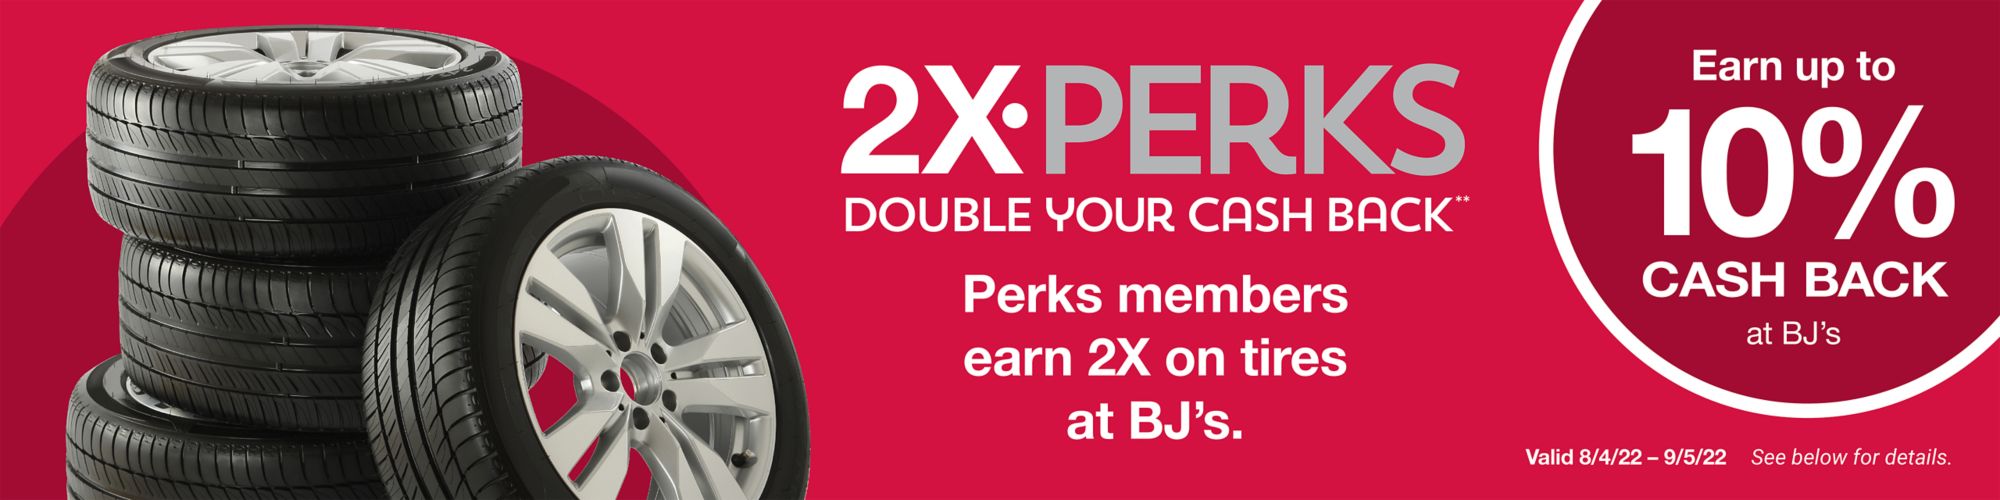 2x perks. Double your cash back. Perks members earn 2x on tires at BJ's. Valid 8/4/22 - 9/5/22. See below for details